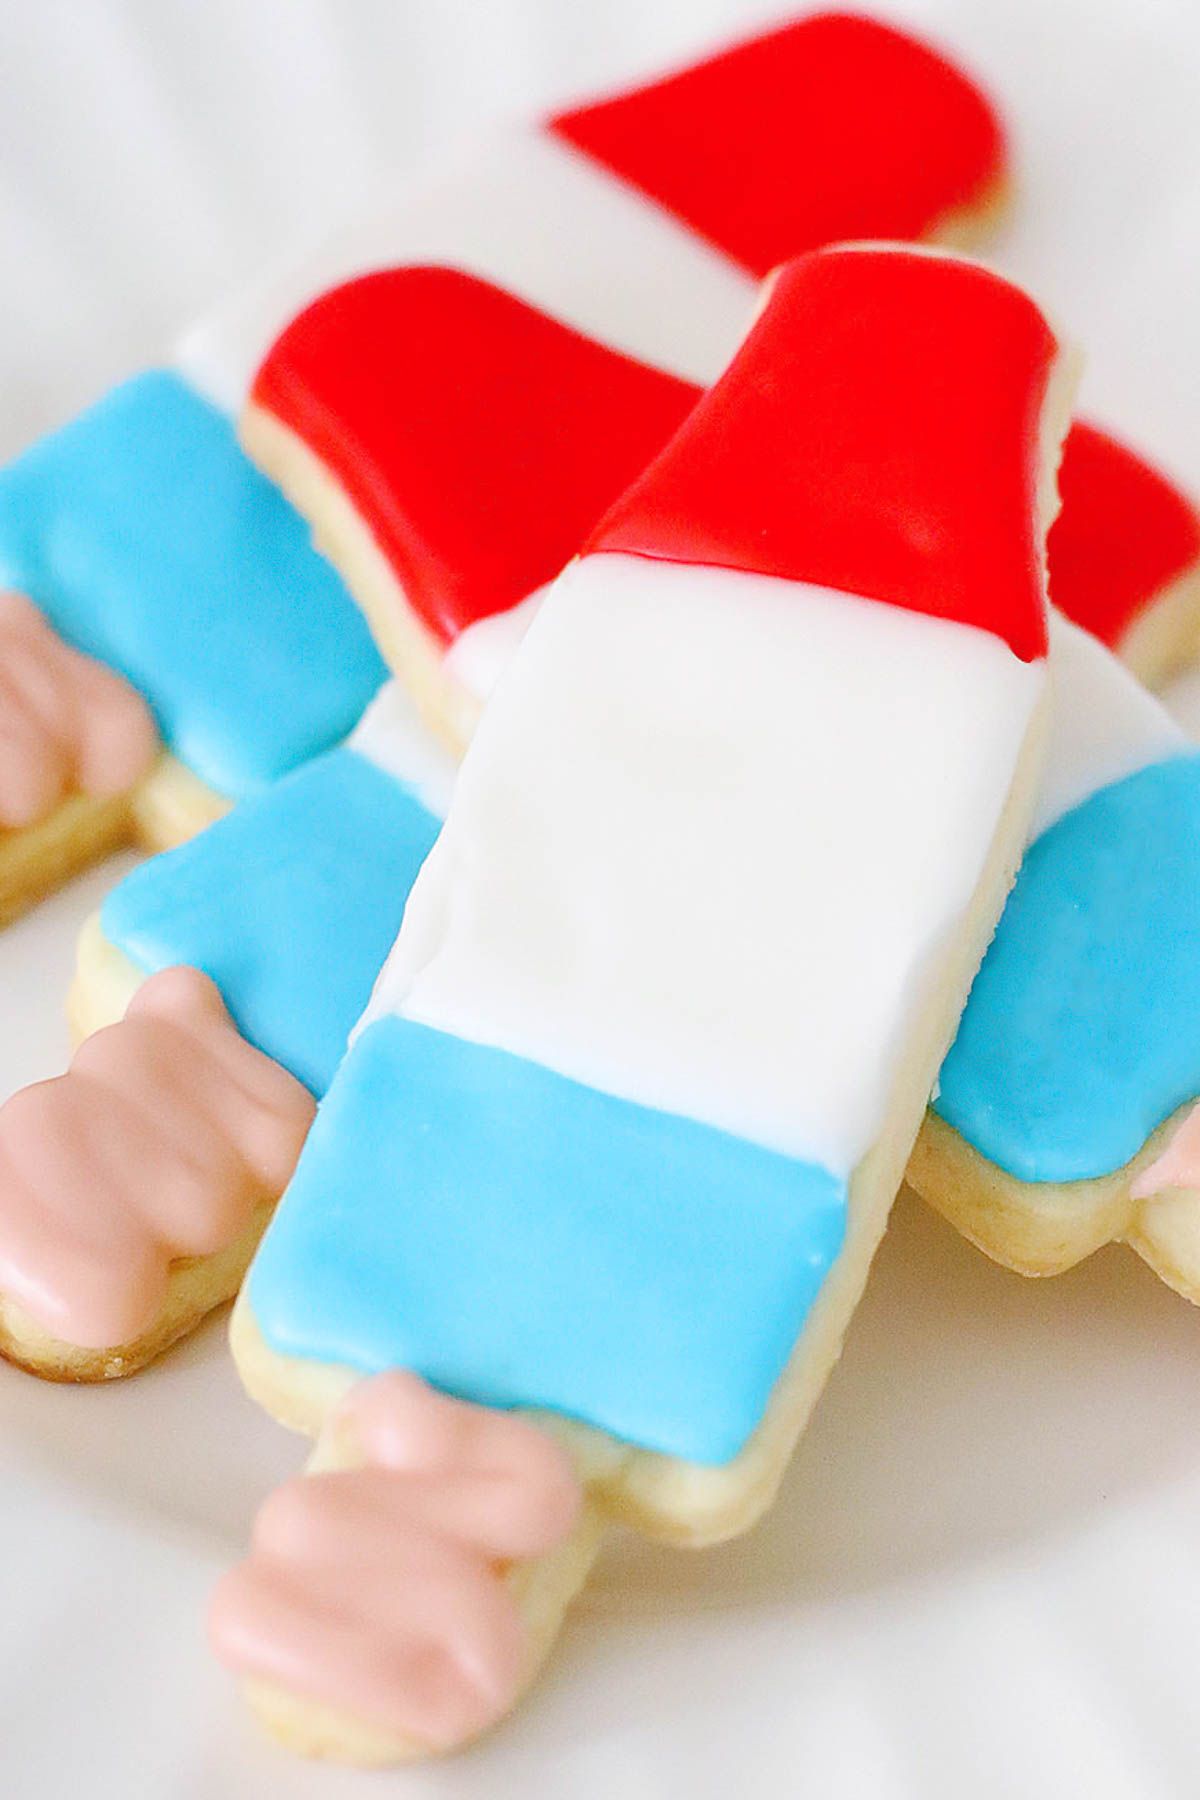 Bomb pop 4th of July sugar cookies on a white plate